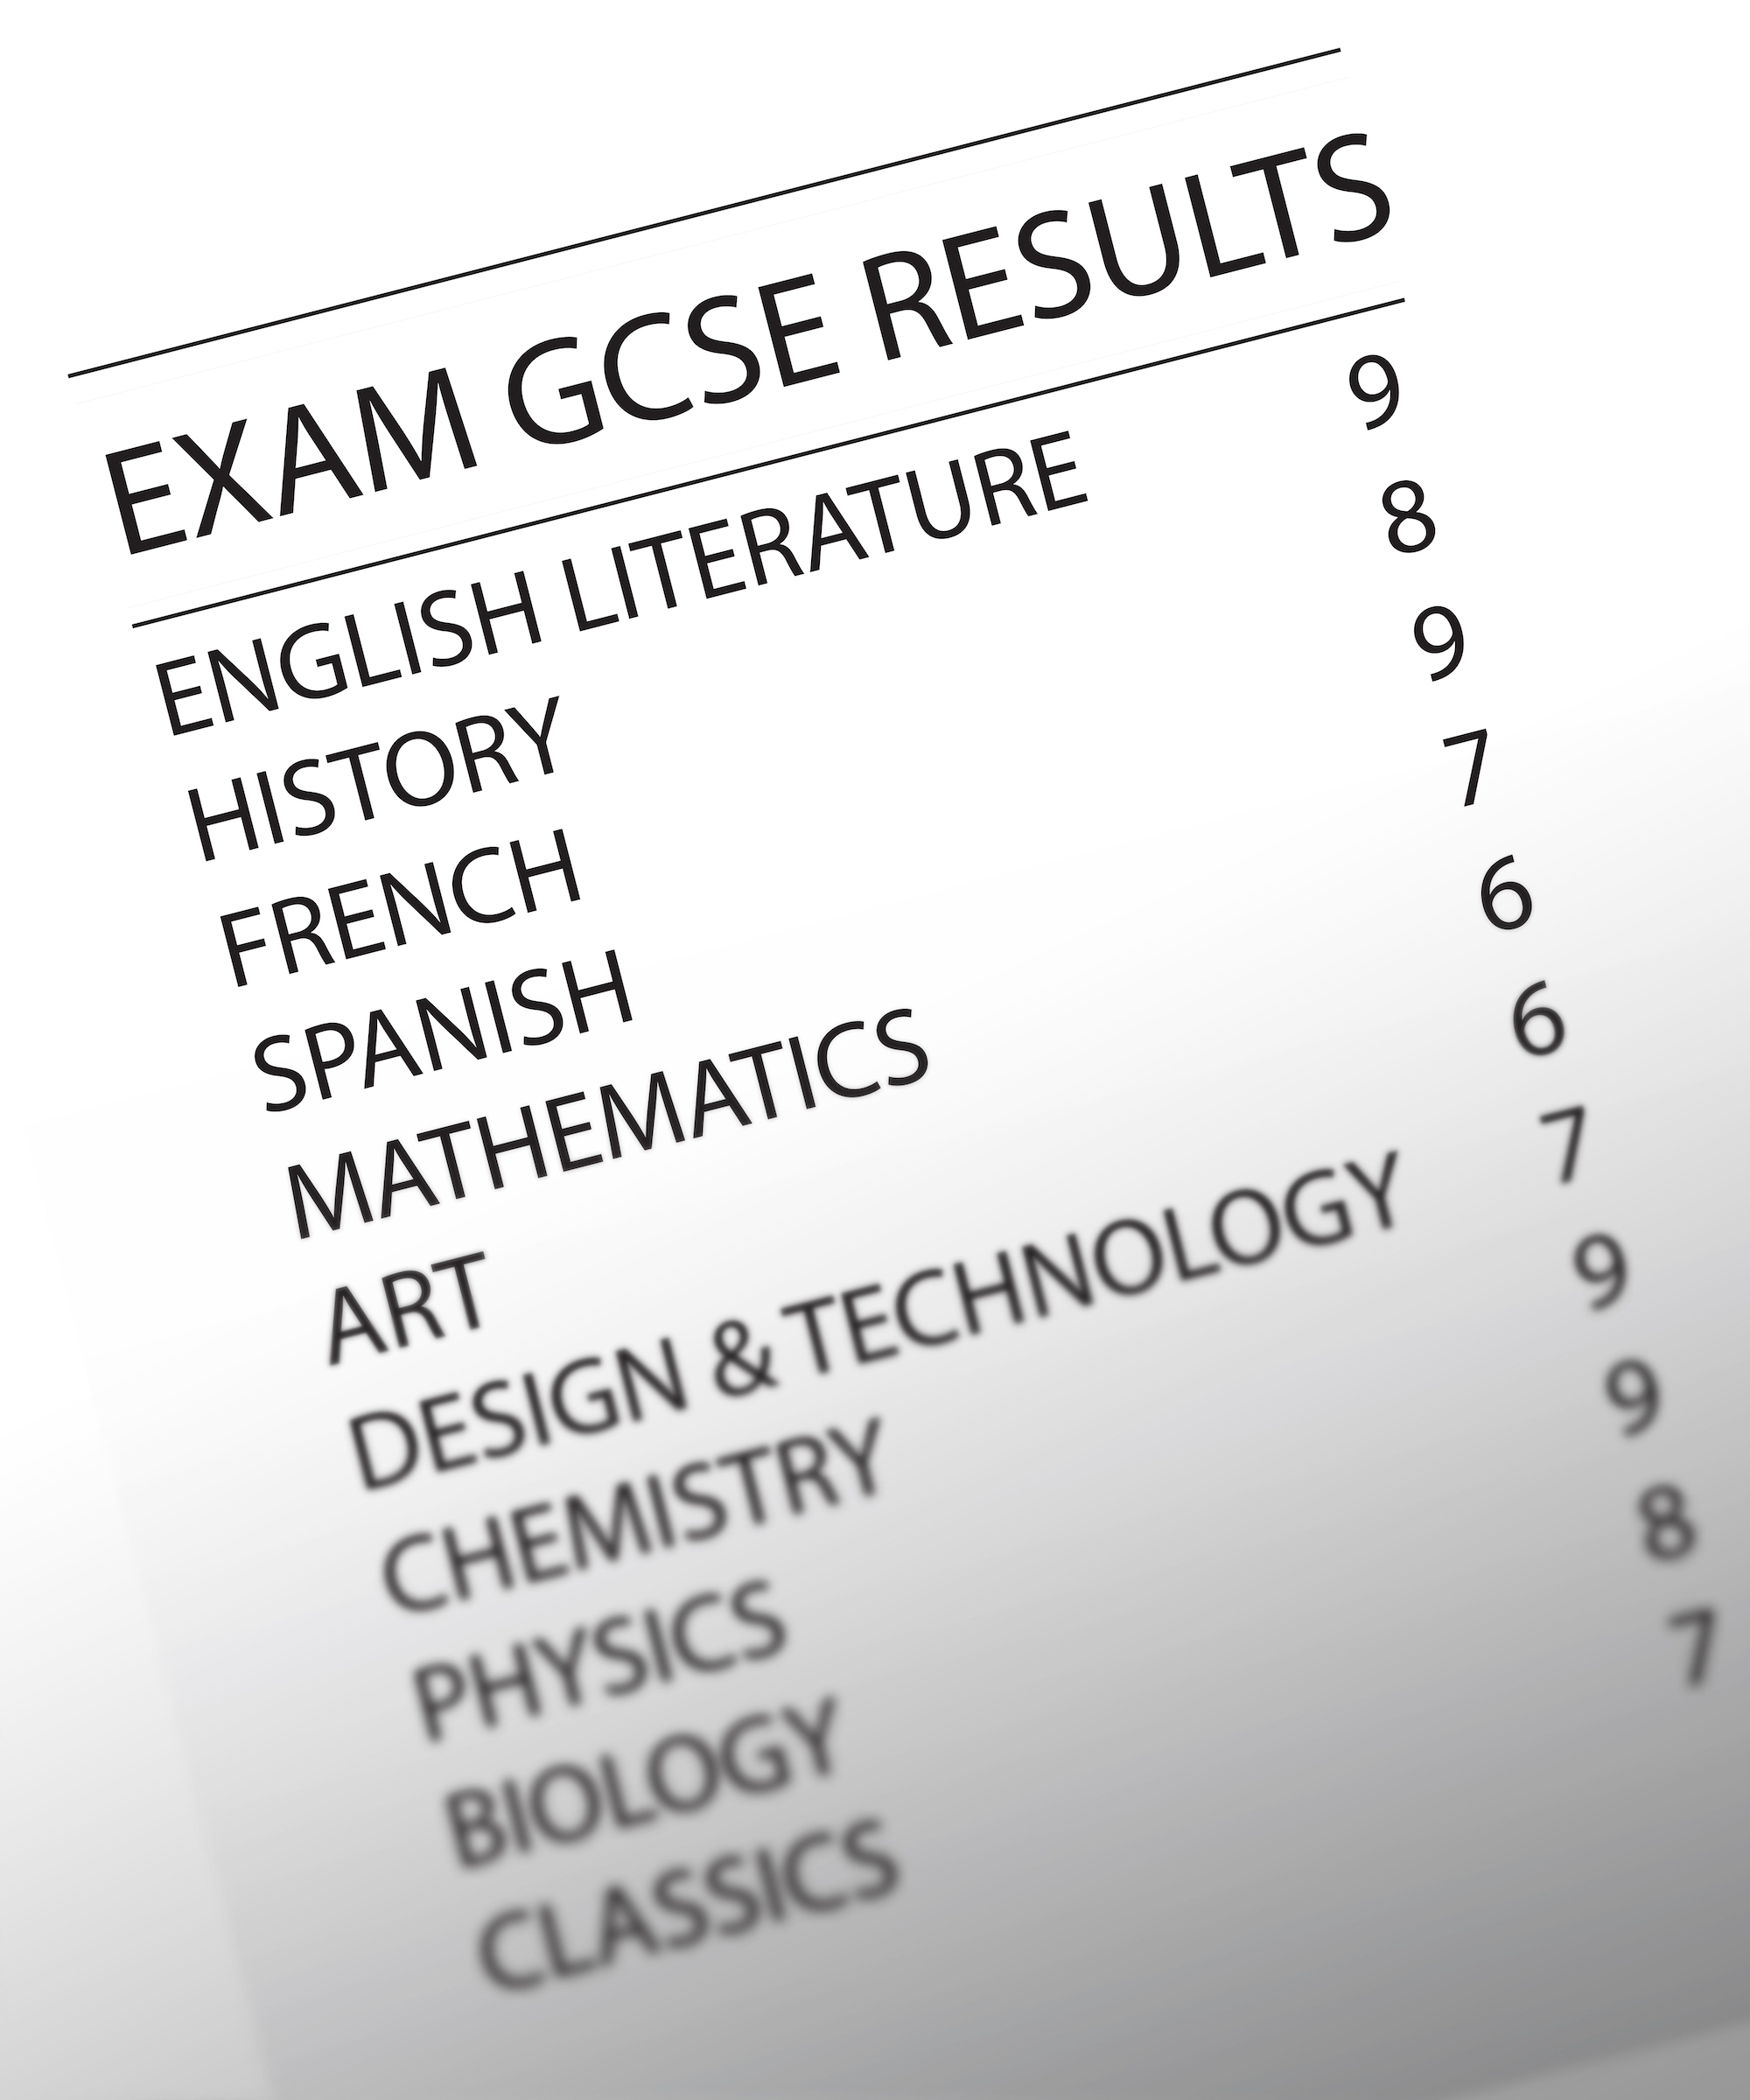 TutorRight GCSE Grades Explained: A guide for parents and students